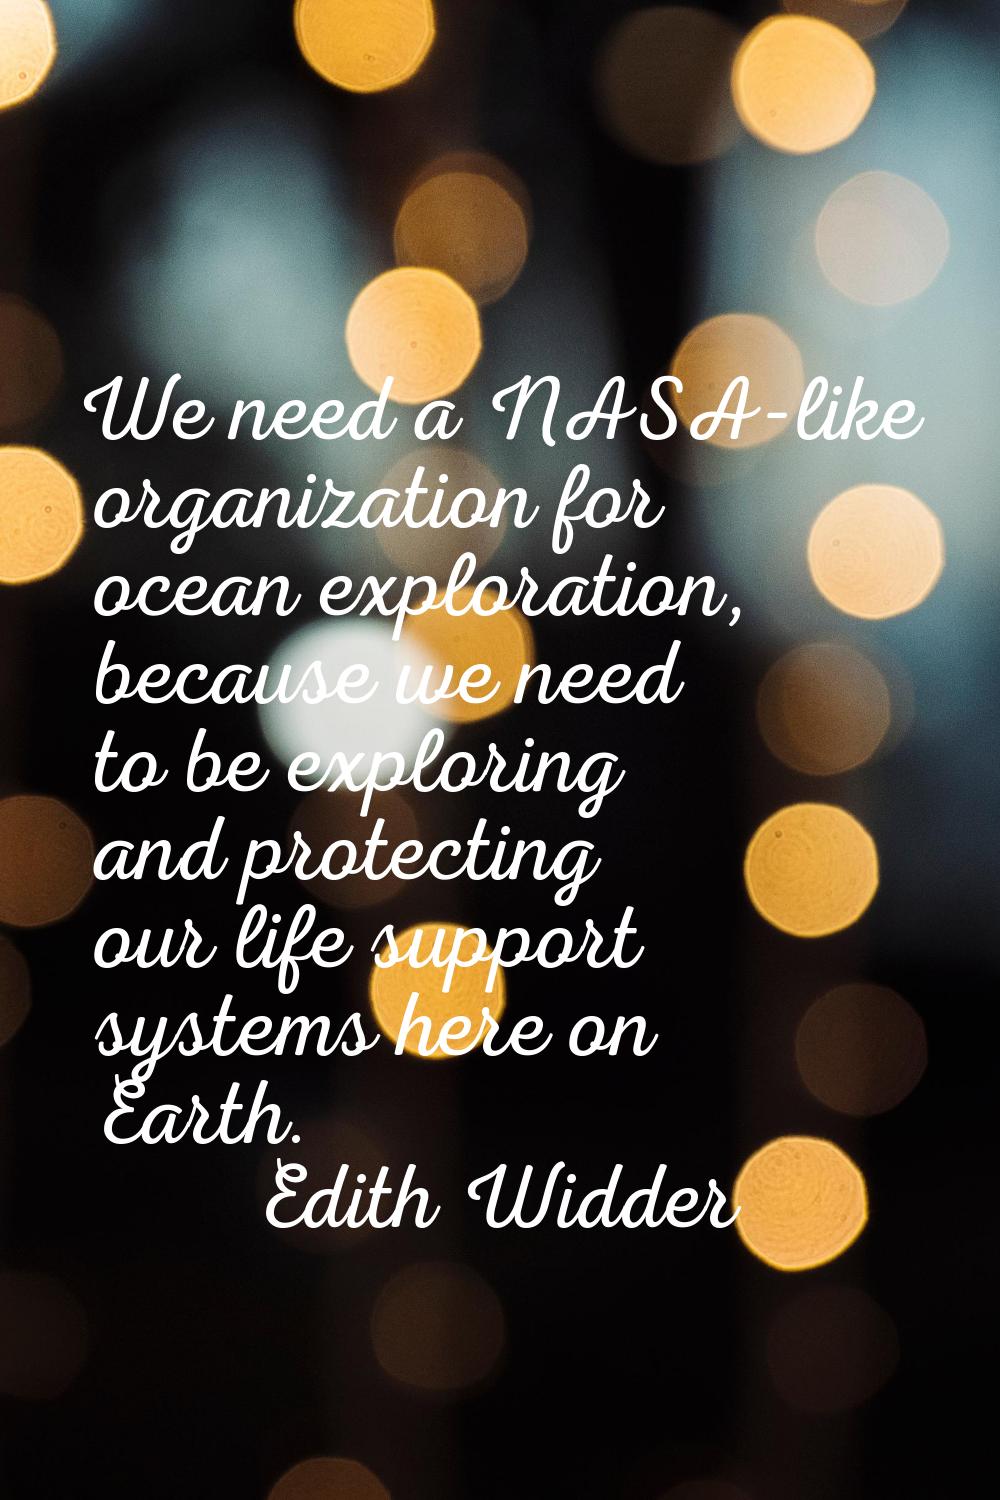 We need a NASA-like organization for ocean exploration, because we need to be exploring and protect